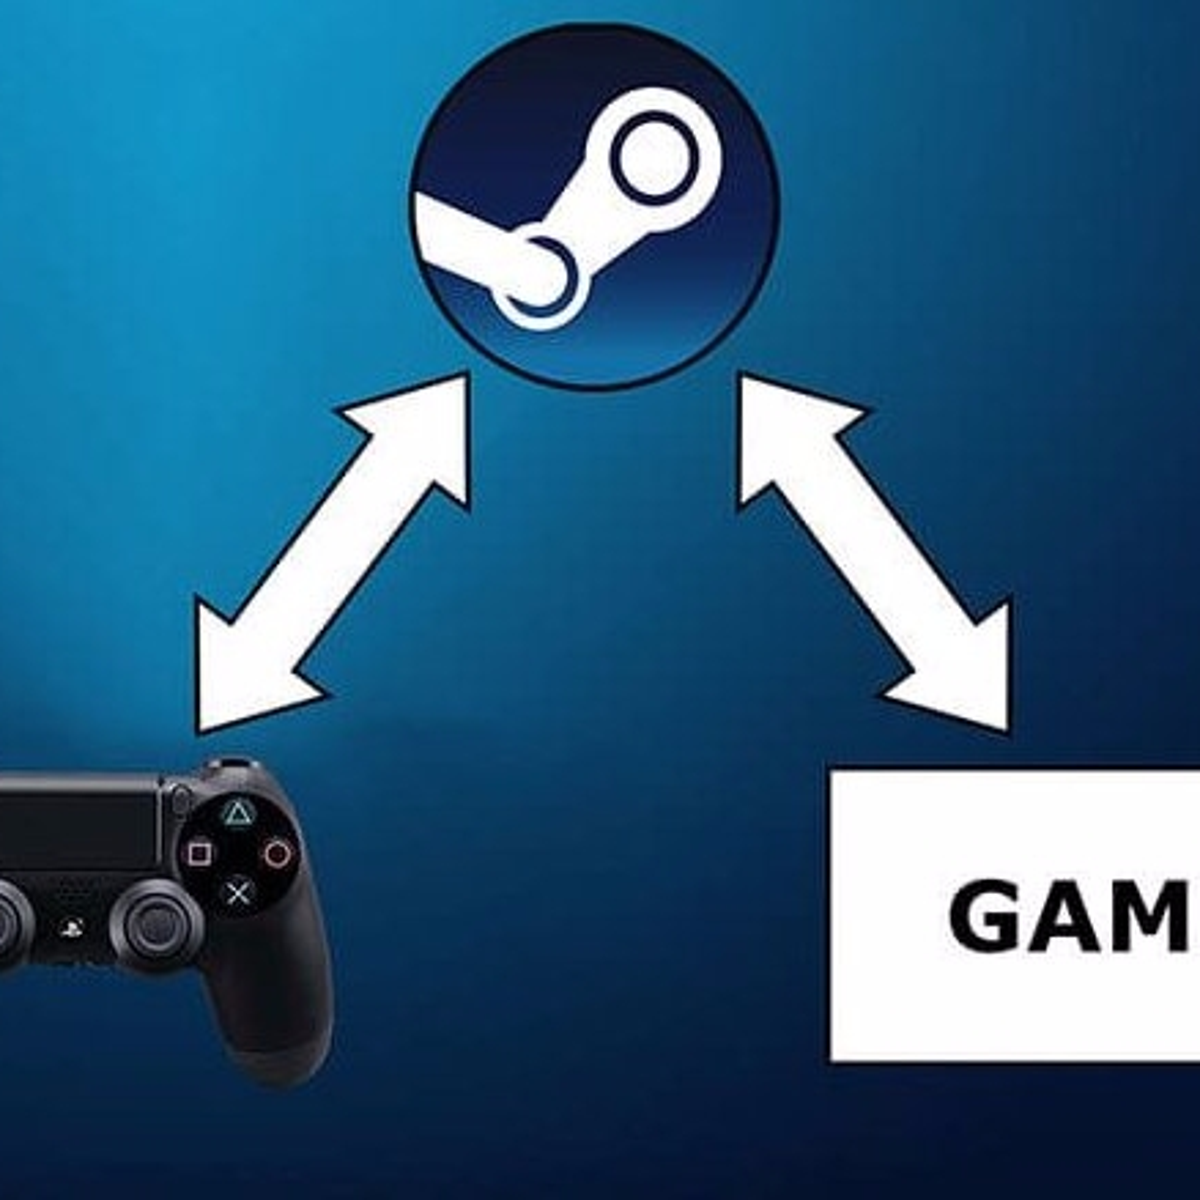 Steam will support PS4 controllers natively on PC